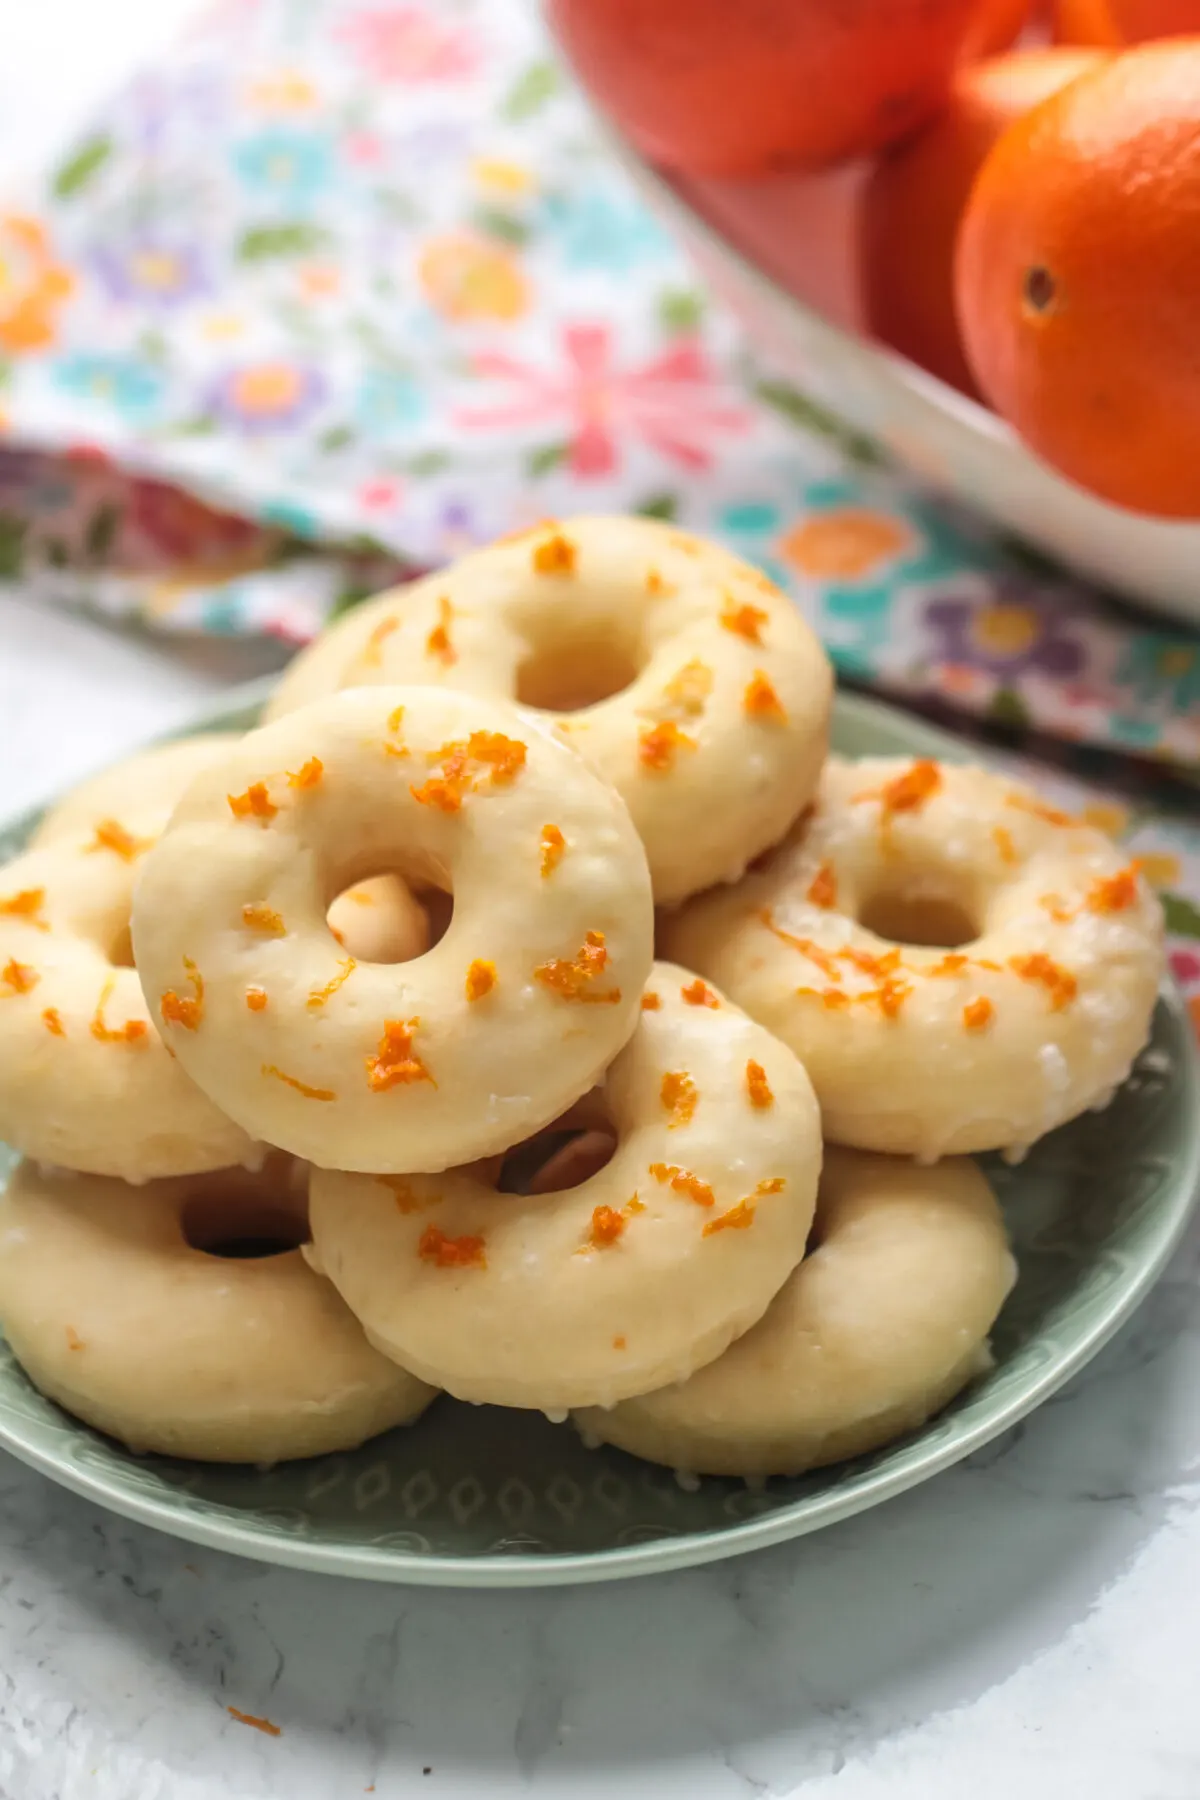 Love homemade donuts? Check out this delicious and easy to follow recipe for orange glazed cake donuts! They can be baked or fried!